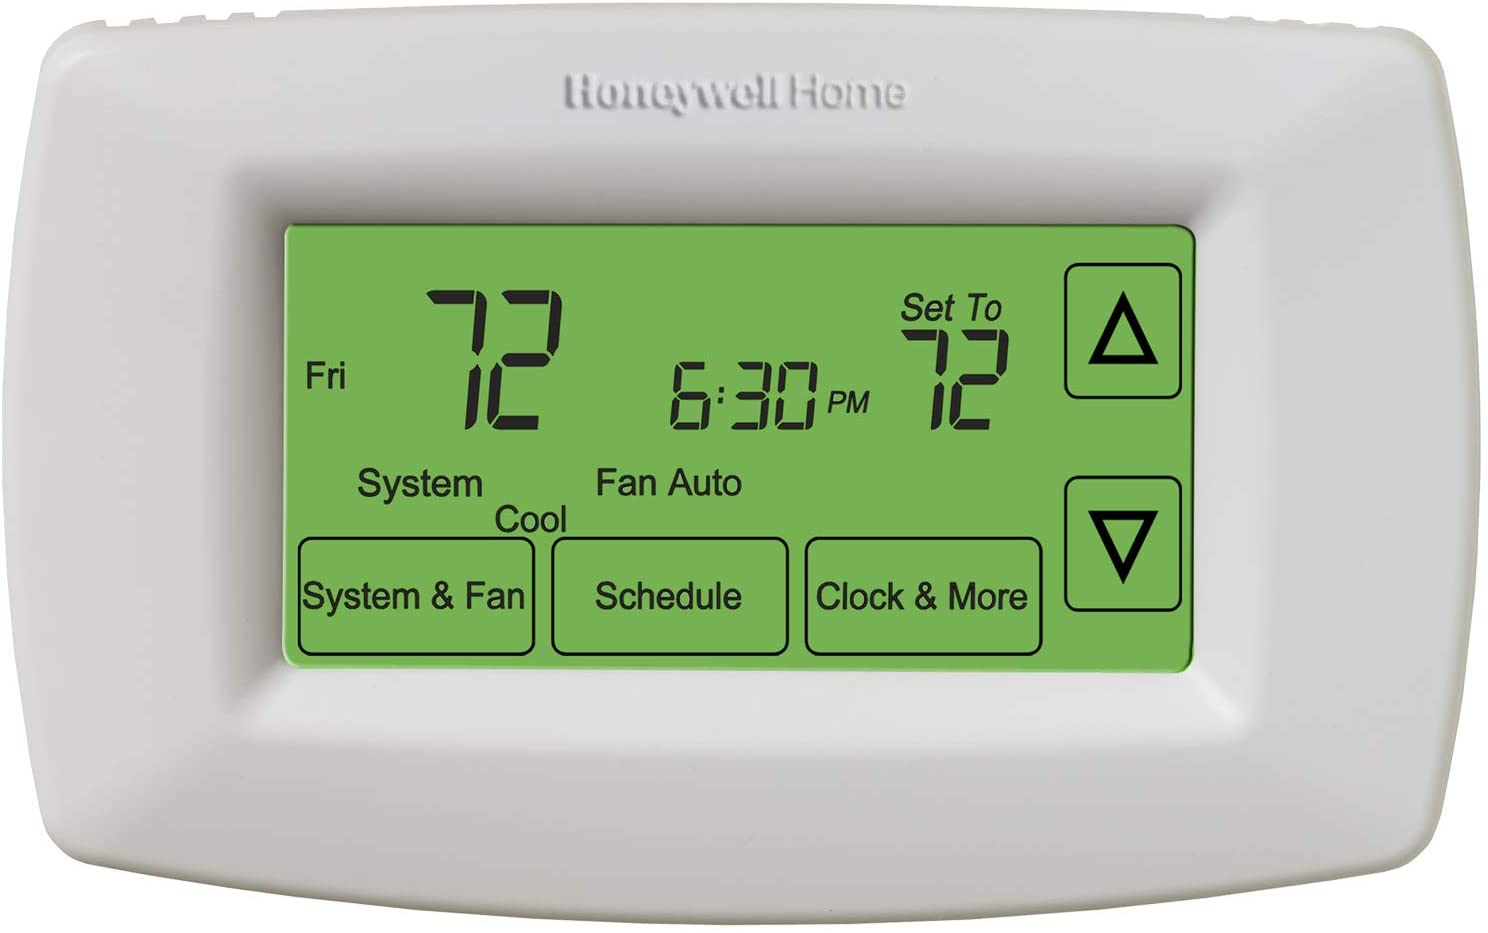 Honeywell RTH7600 Touchscreen Programmable Thermostat User Manual